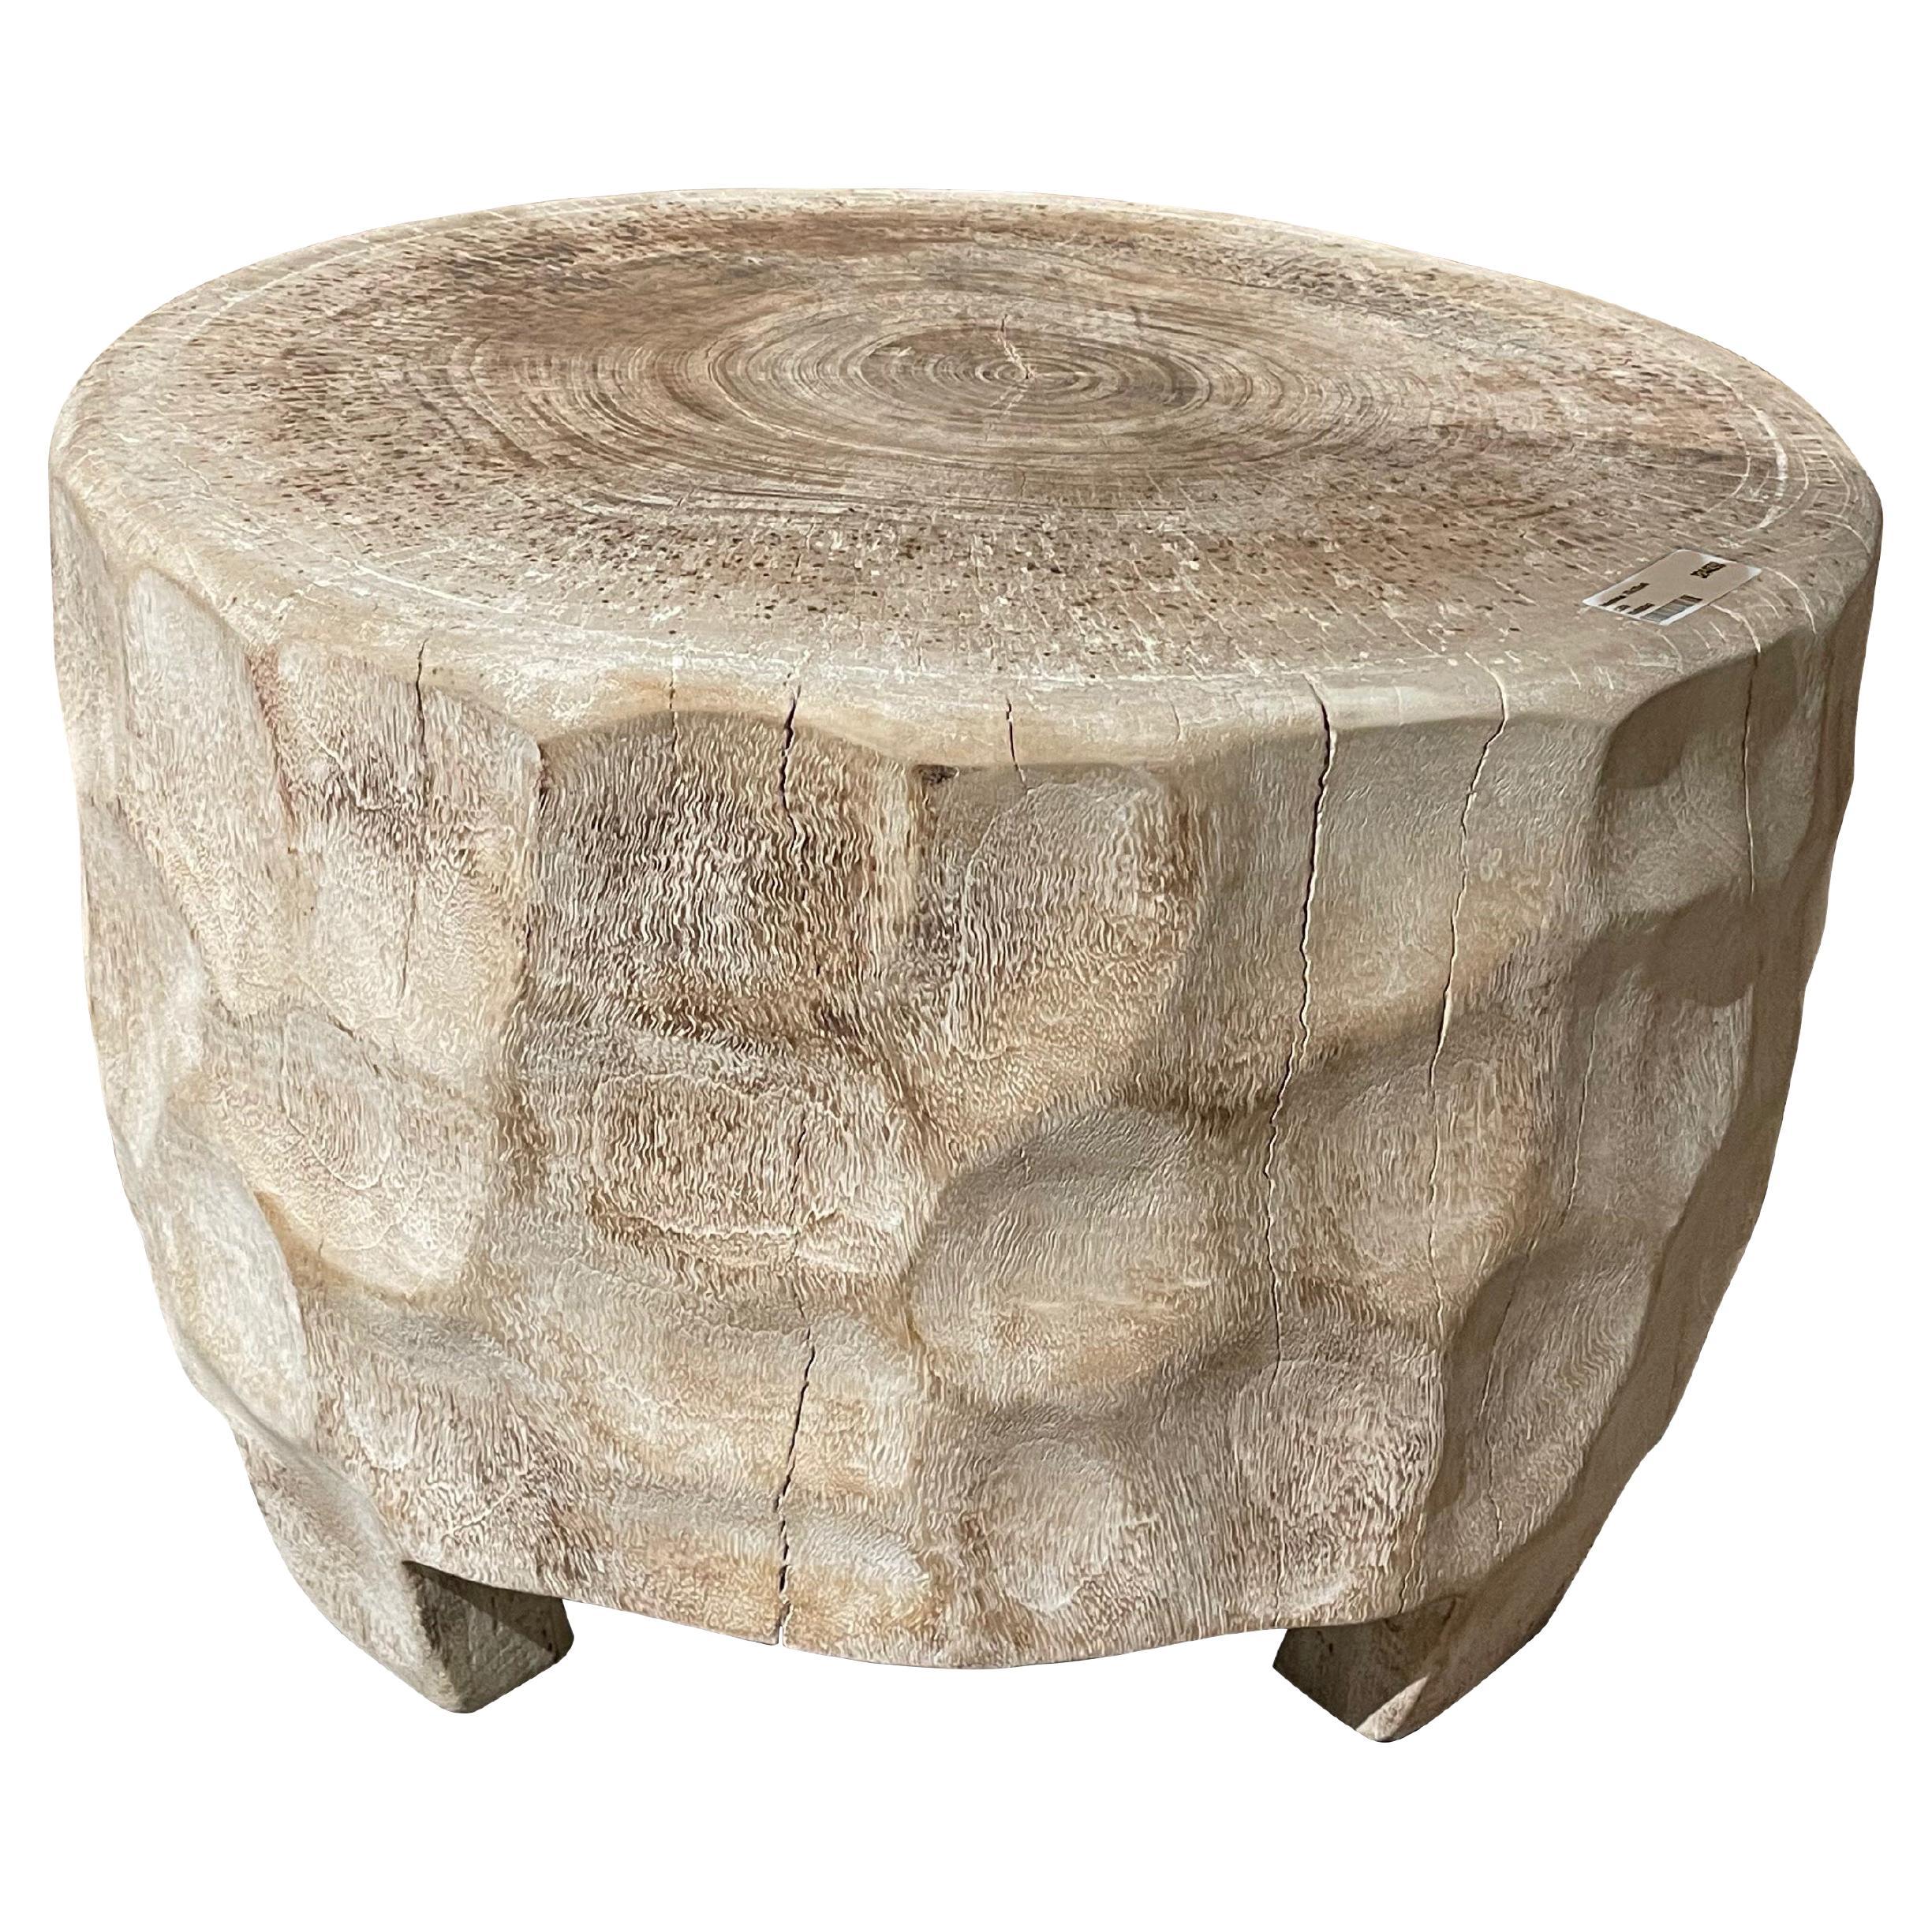 Bleached Suar Wood Coffee Table, Indonesia, Contemporary